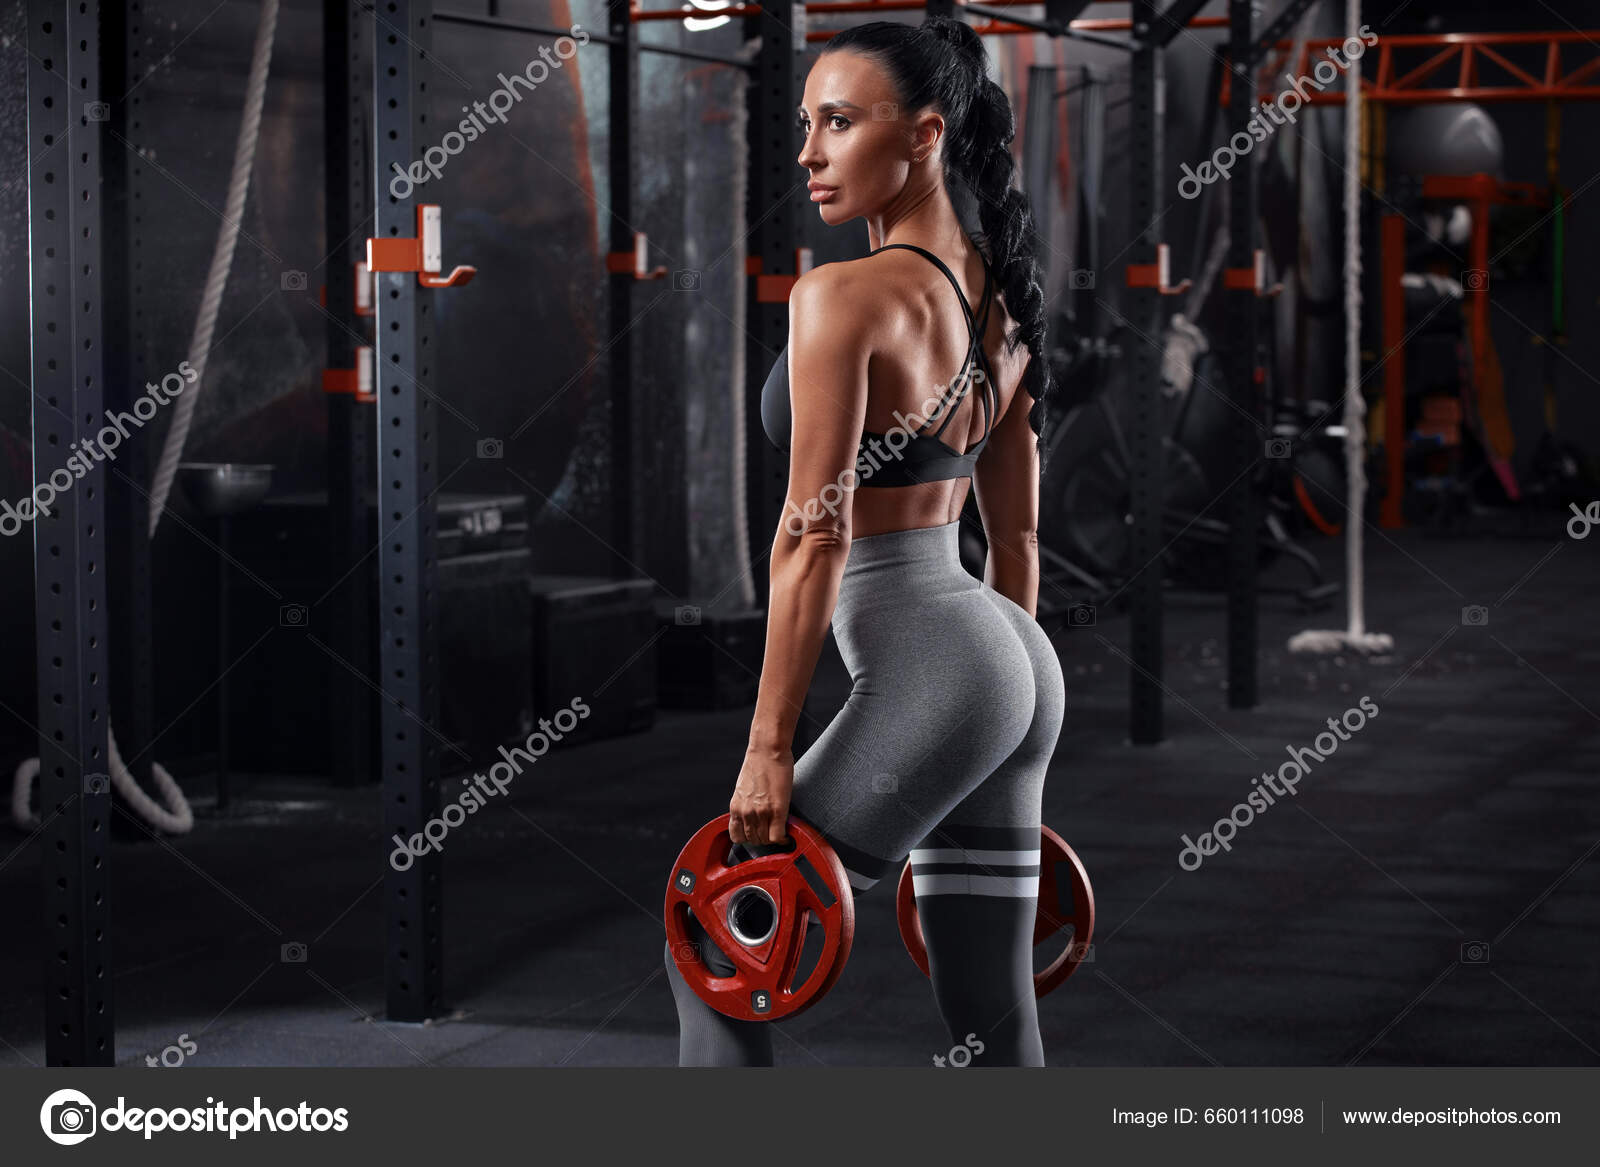 Fitness woman doing pull-ups exercise for back muscles, working